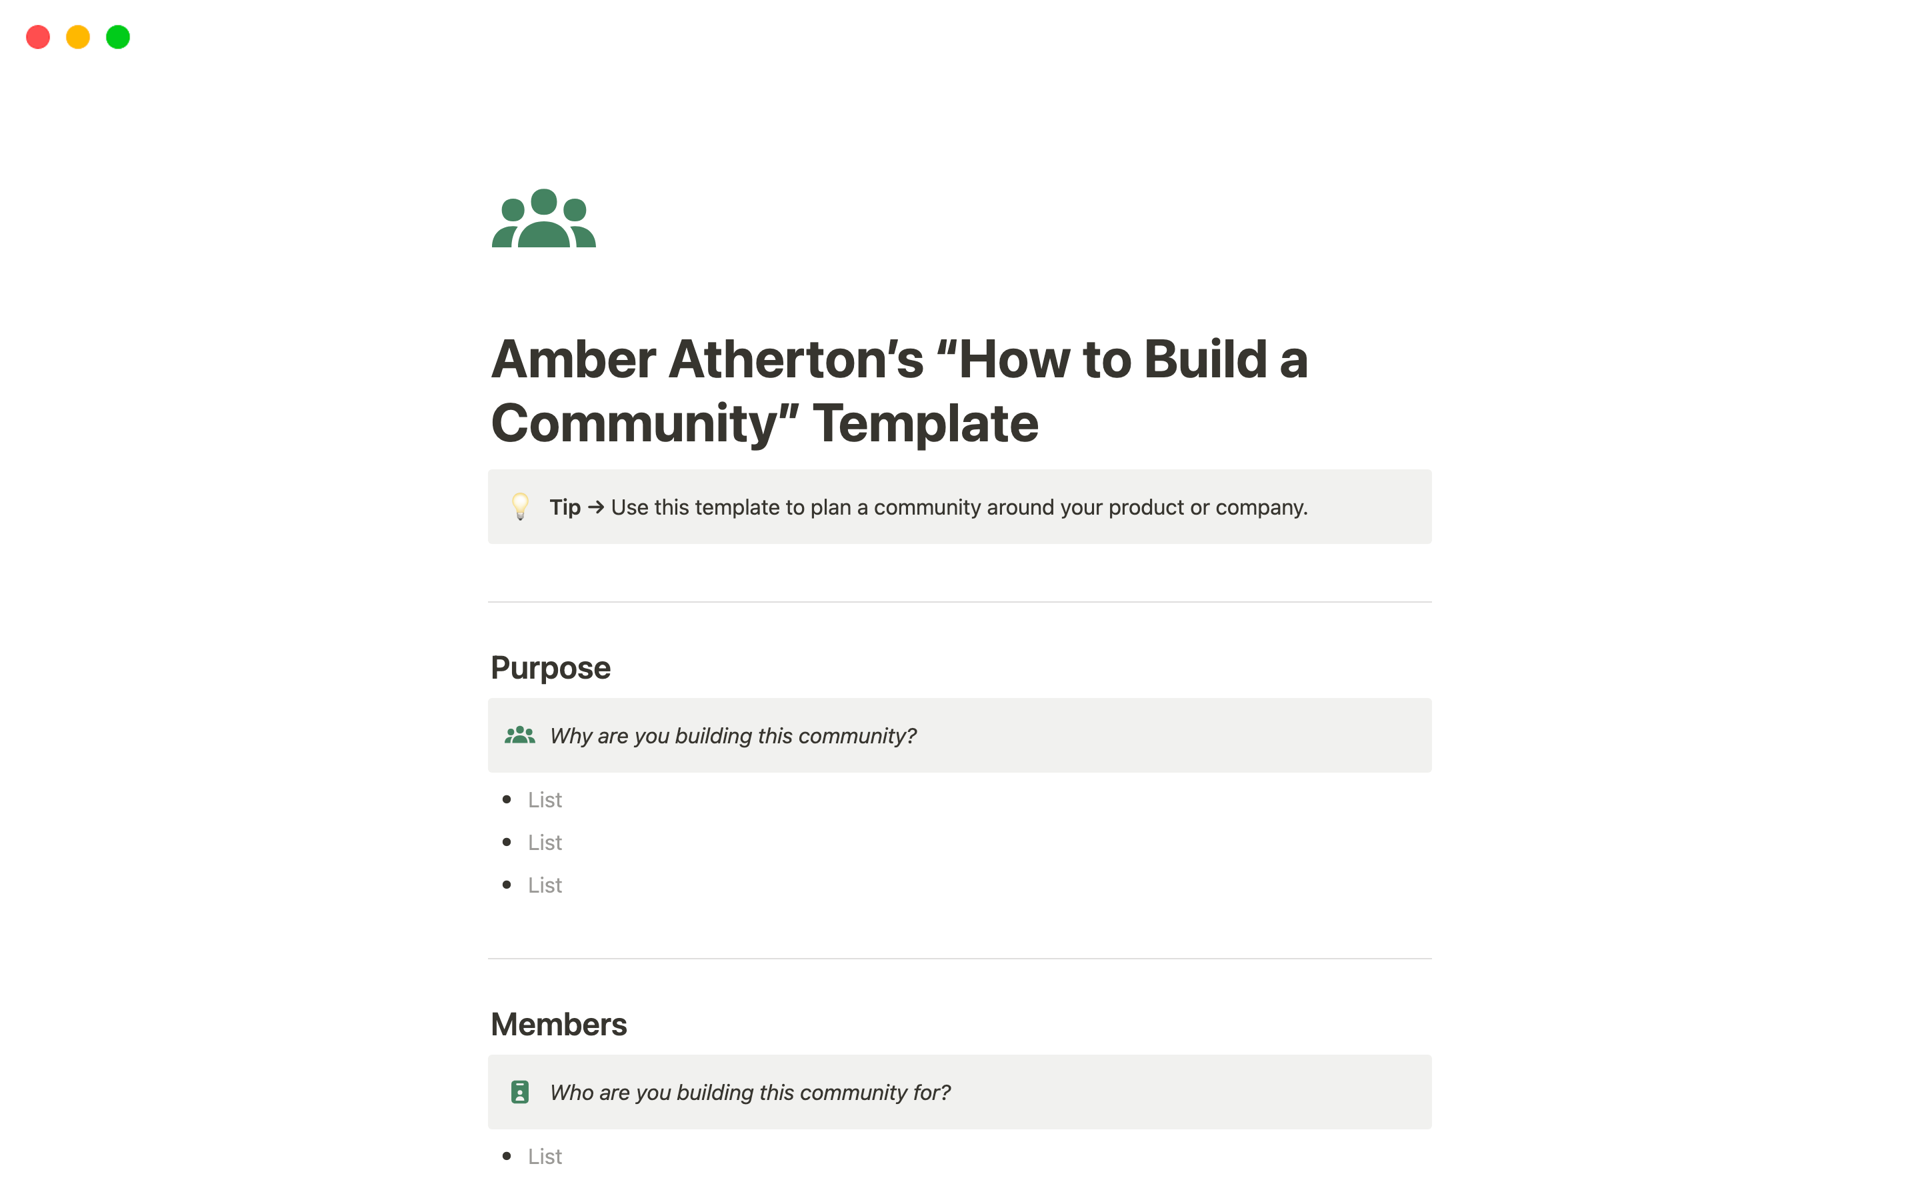 Use this template to plan a community around your product or company.